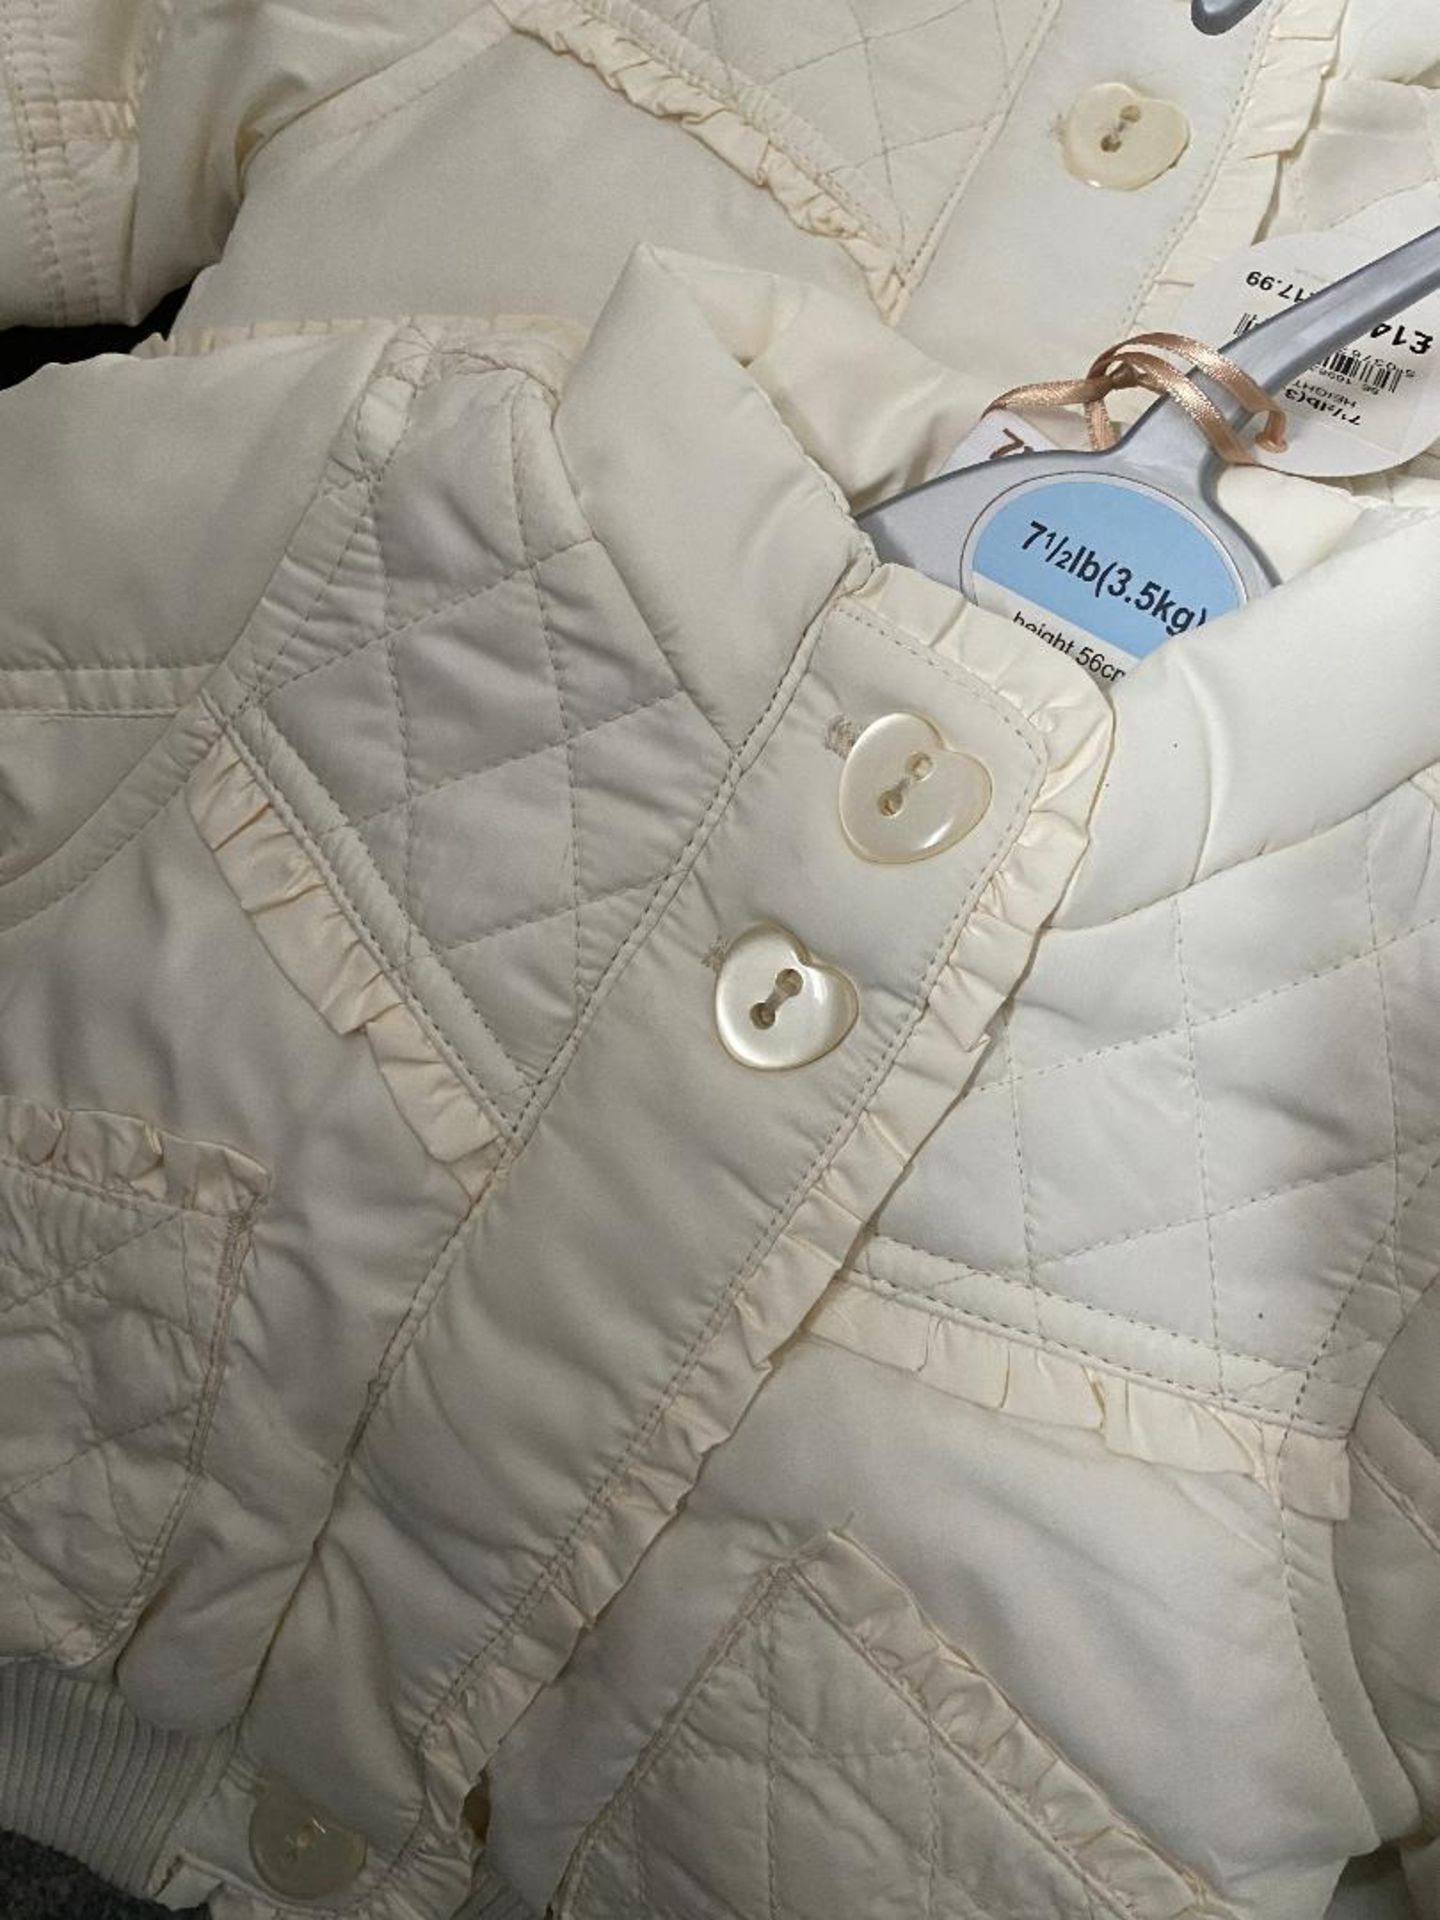 6 x Baby Coat/Jacket Cream Brand New By Adams Baby RRP £14.99 Each - Image 2 of 2